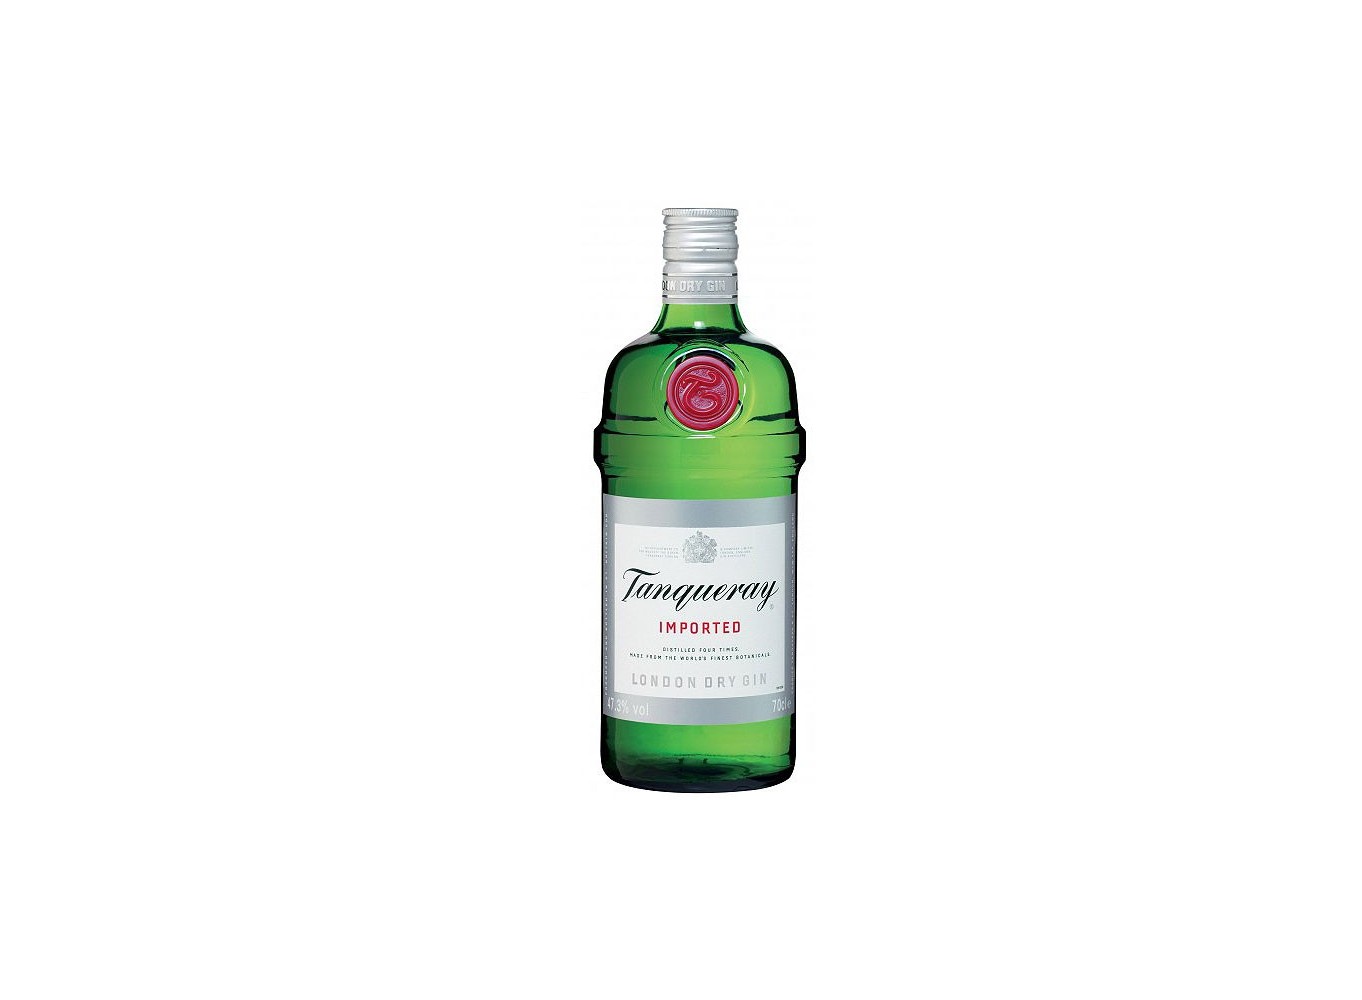 GIN TANQUERAY 70CL